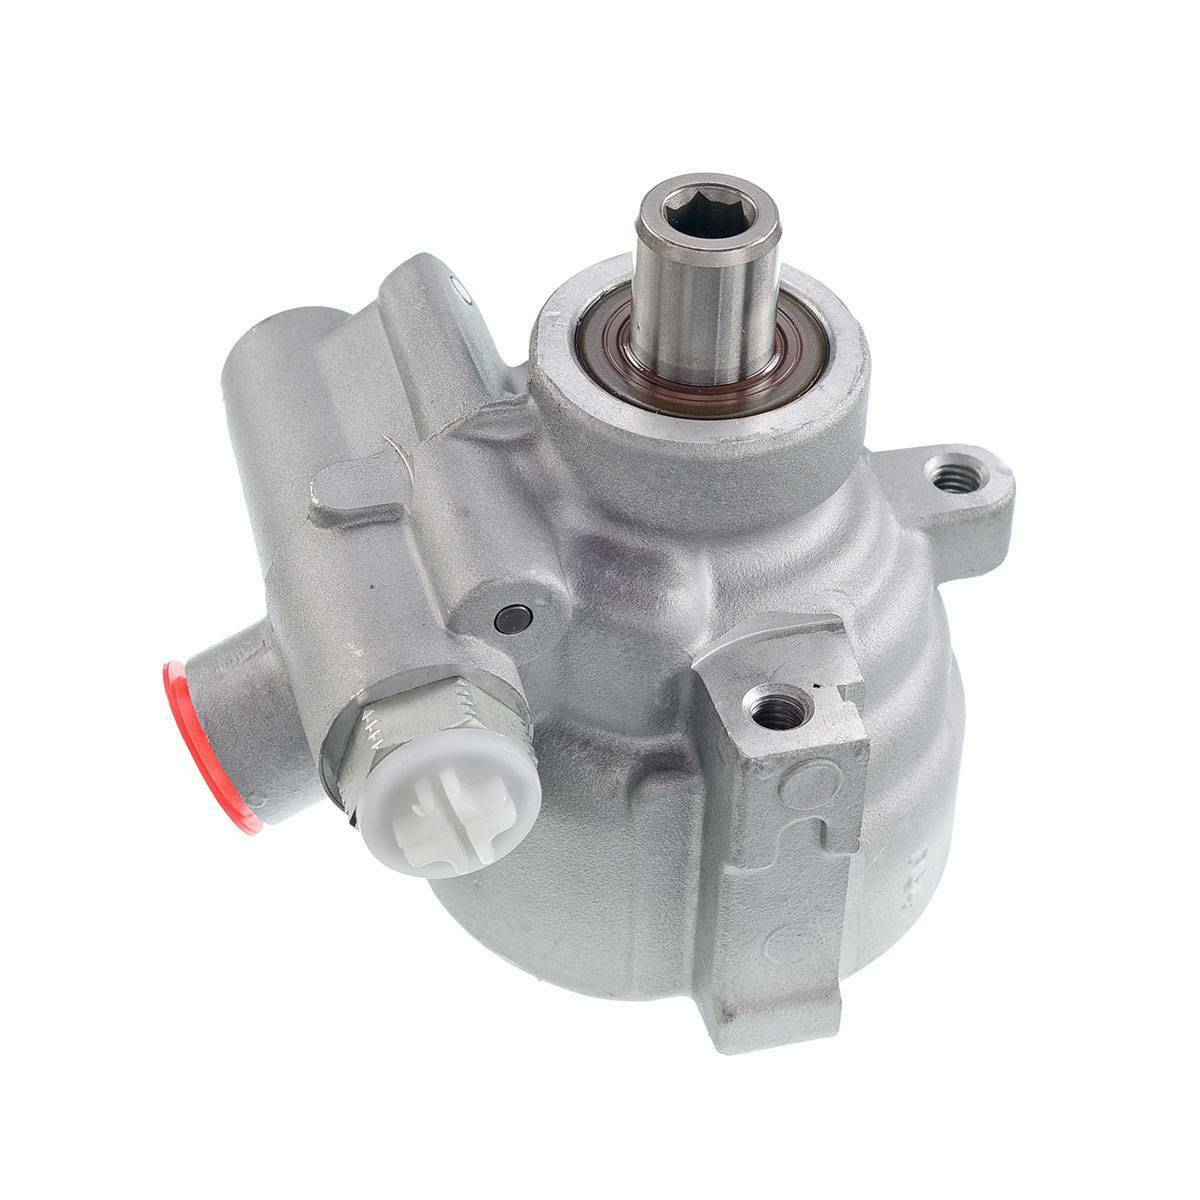 New Power Steering Pump w/ Pulley for Chevrolet Impala Monte Carlo 20-69989 US 